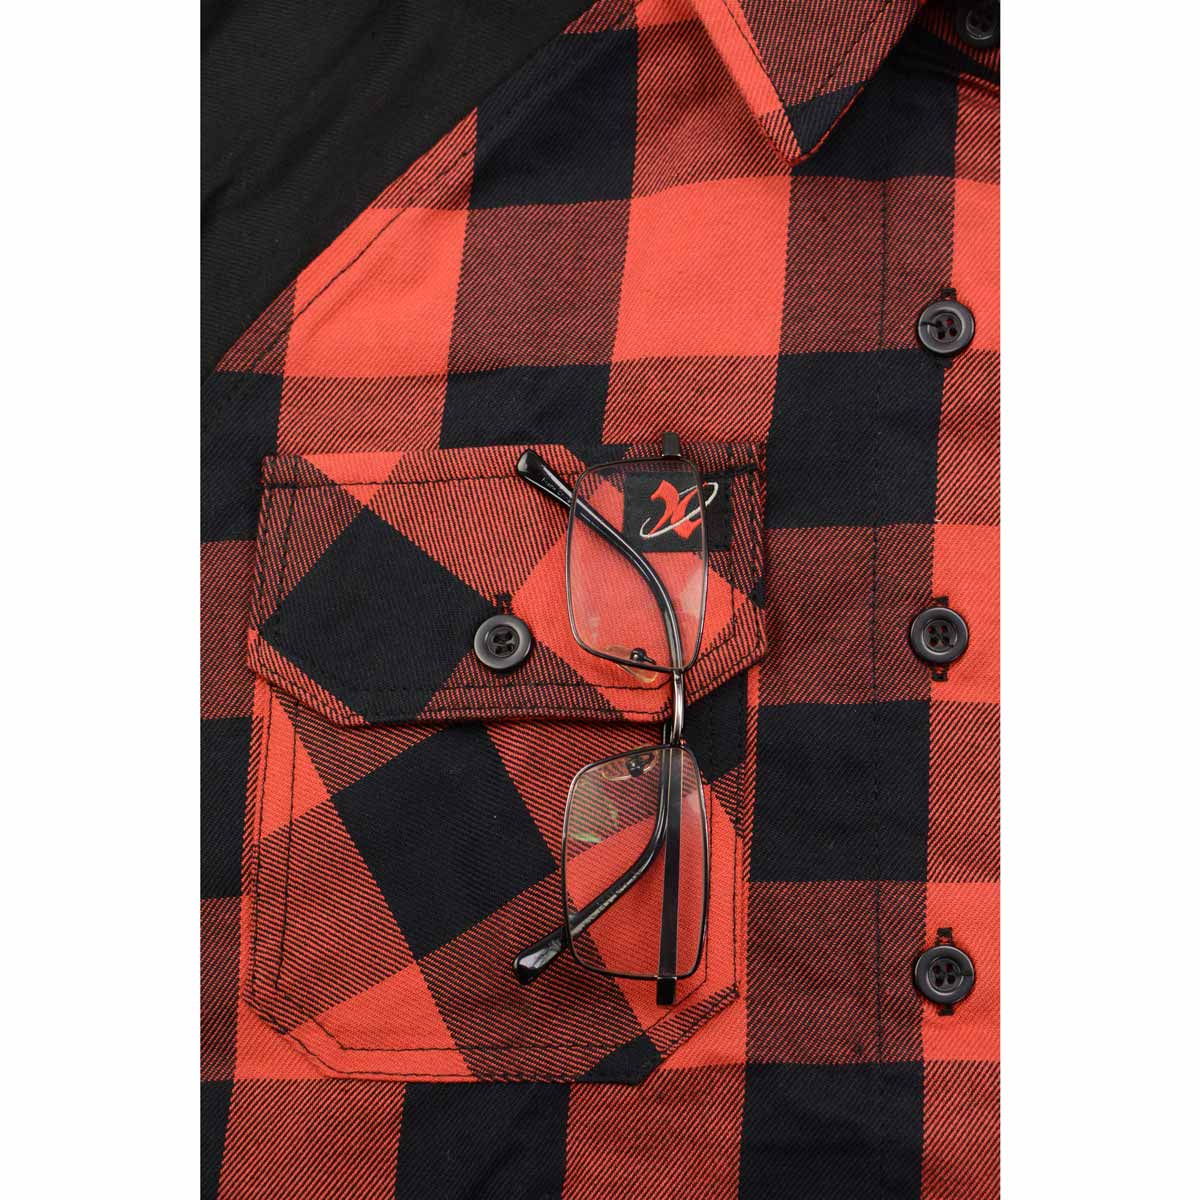 Milwaukee Leather MNG21602 Women's Casual Black and Red Long Sleeve Cotton Flannel Shirt with Hoodie